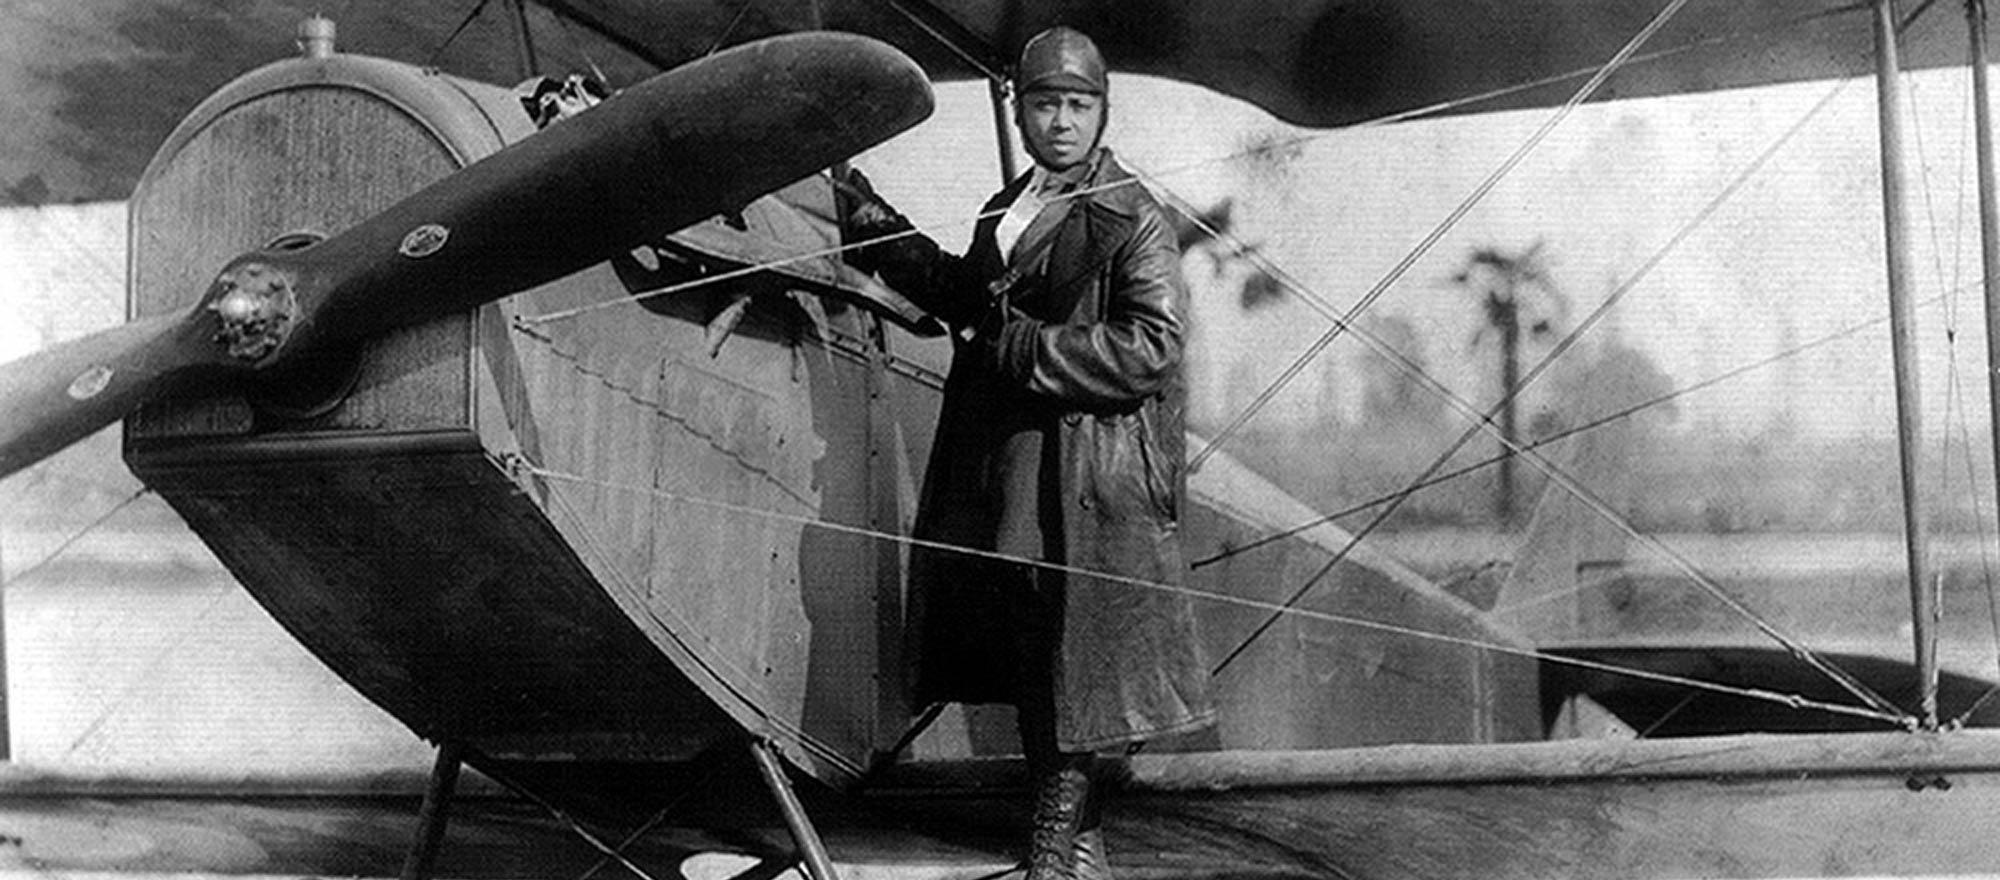 Bessie Coleman and her airplane in 1922